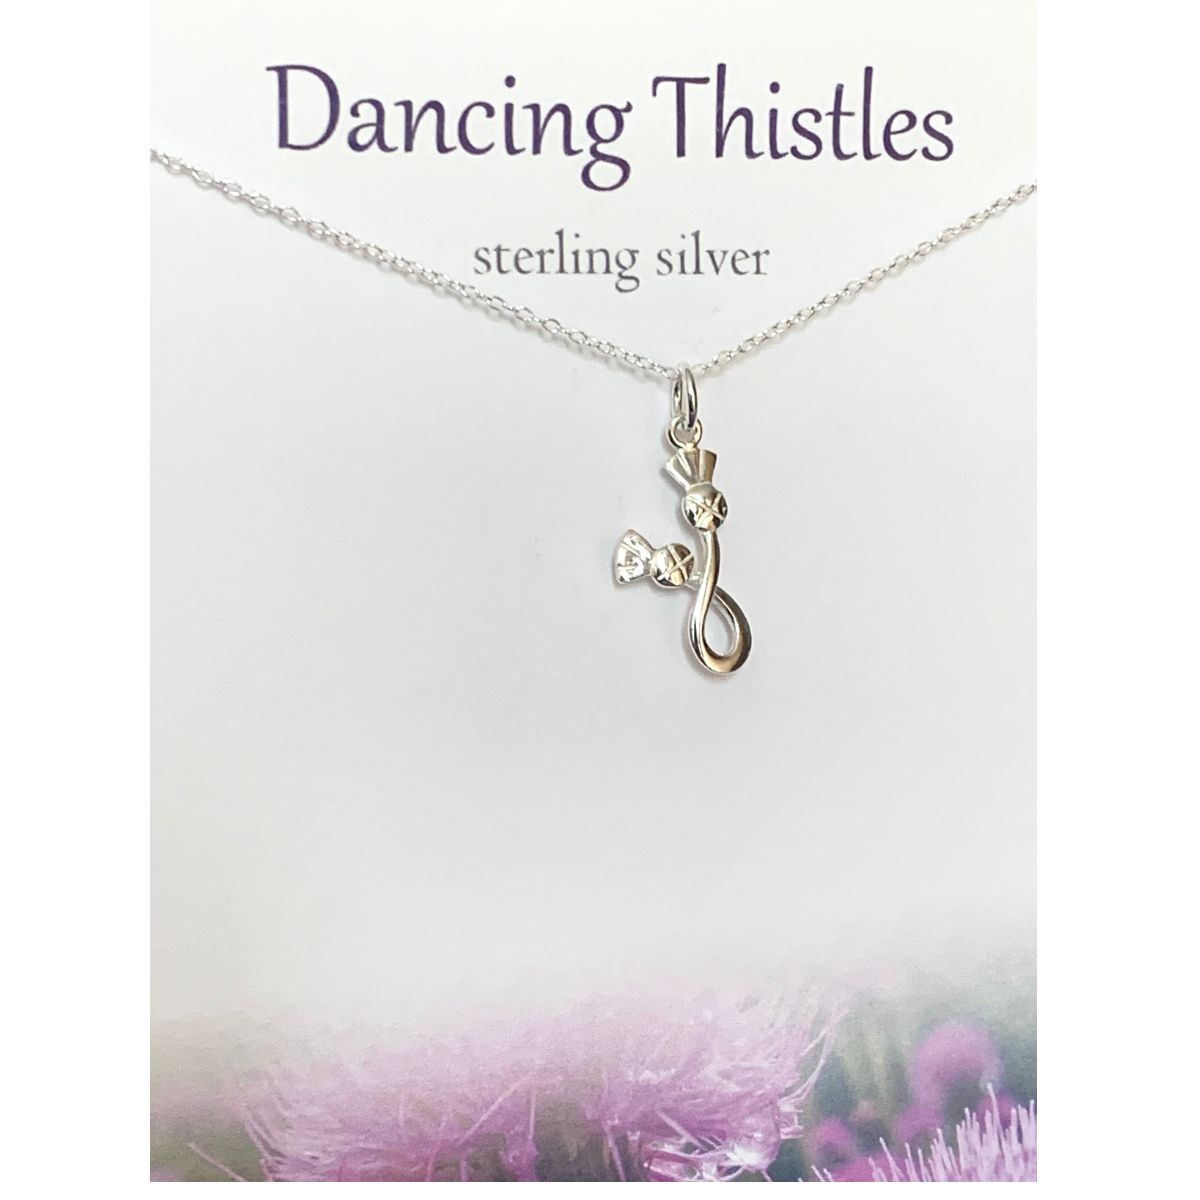 Card saying 'Dancing Thistles, Sterling Silver' featuring a sterling silver necklace with two entwined thistles as a pendant.